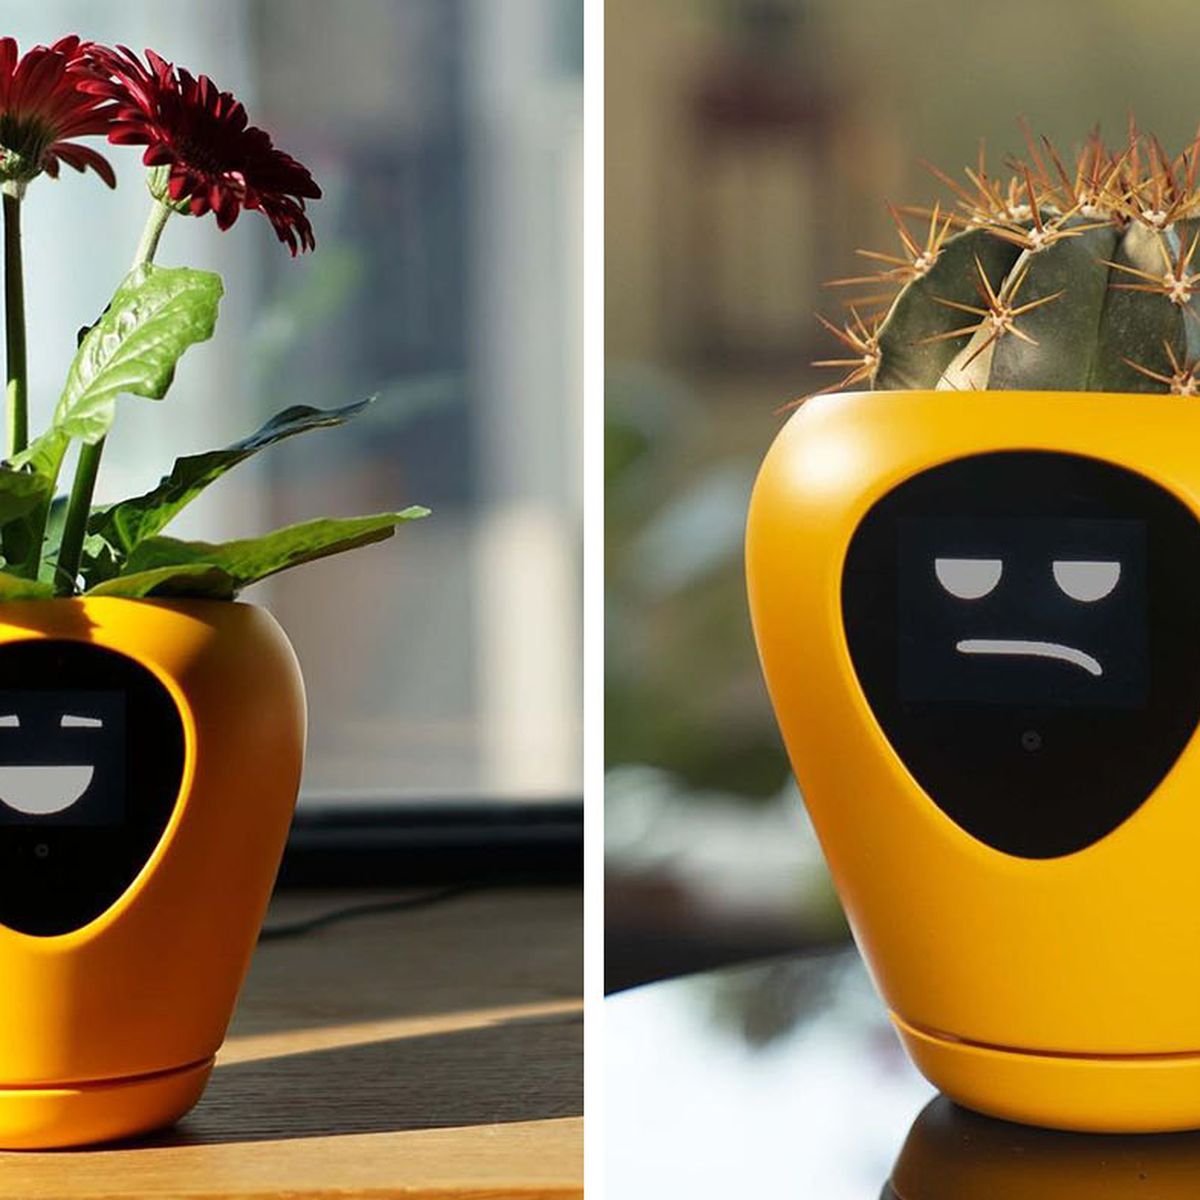 What the Lua Planter: Smart pot will tell you if your is happy and healthy through app